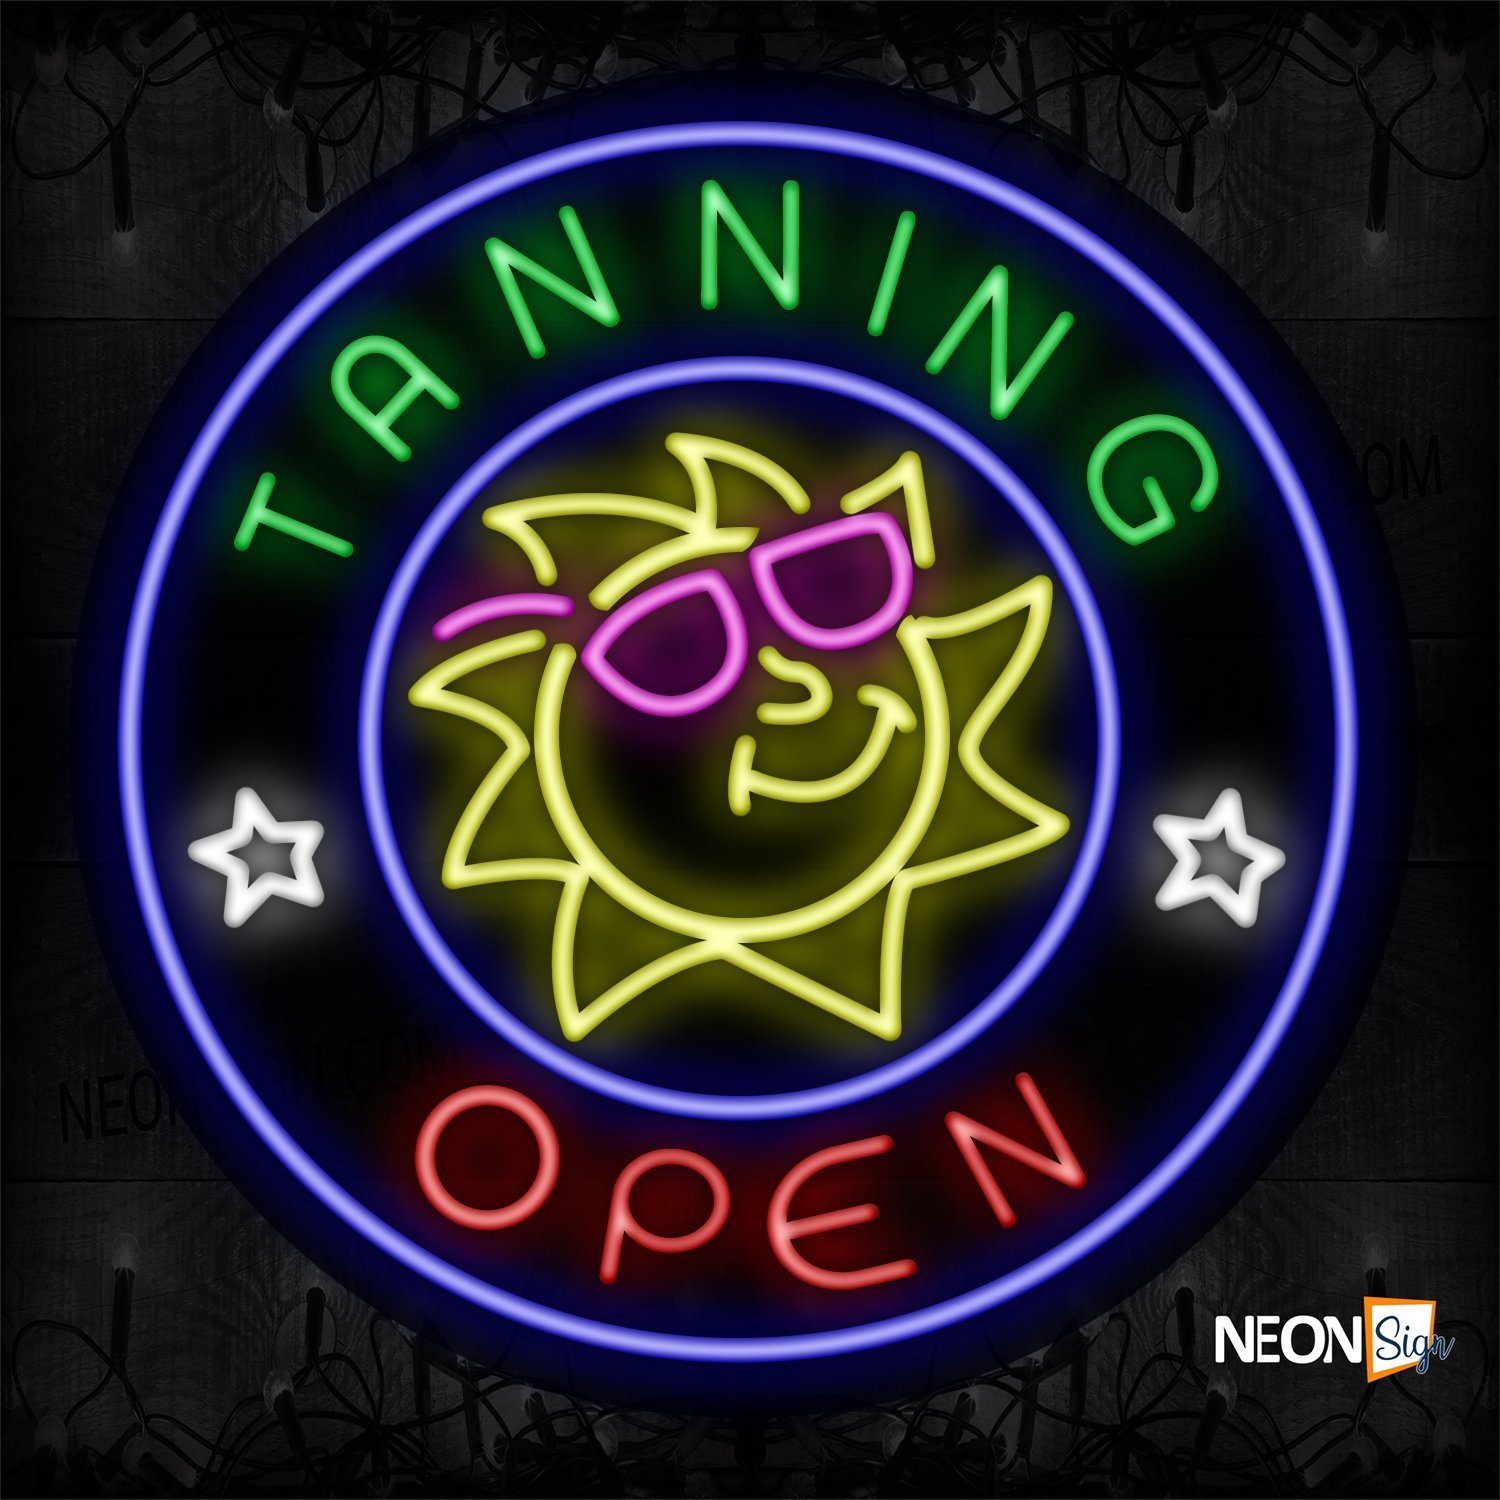 Image of Tanning Open With Sun Logo And Blue Circle Border Neon Sign